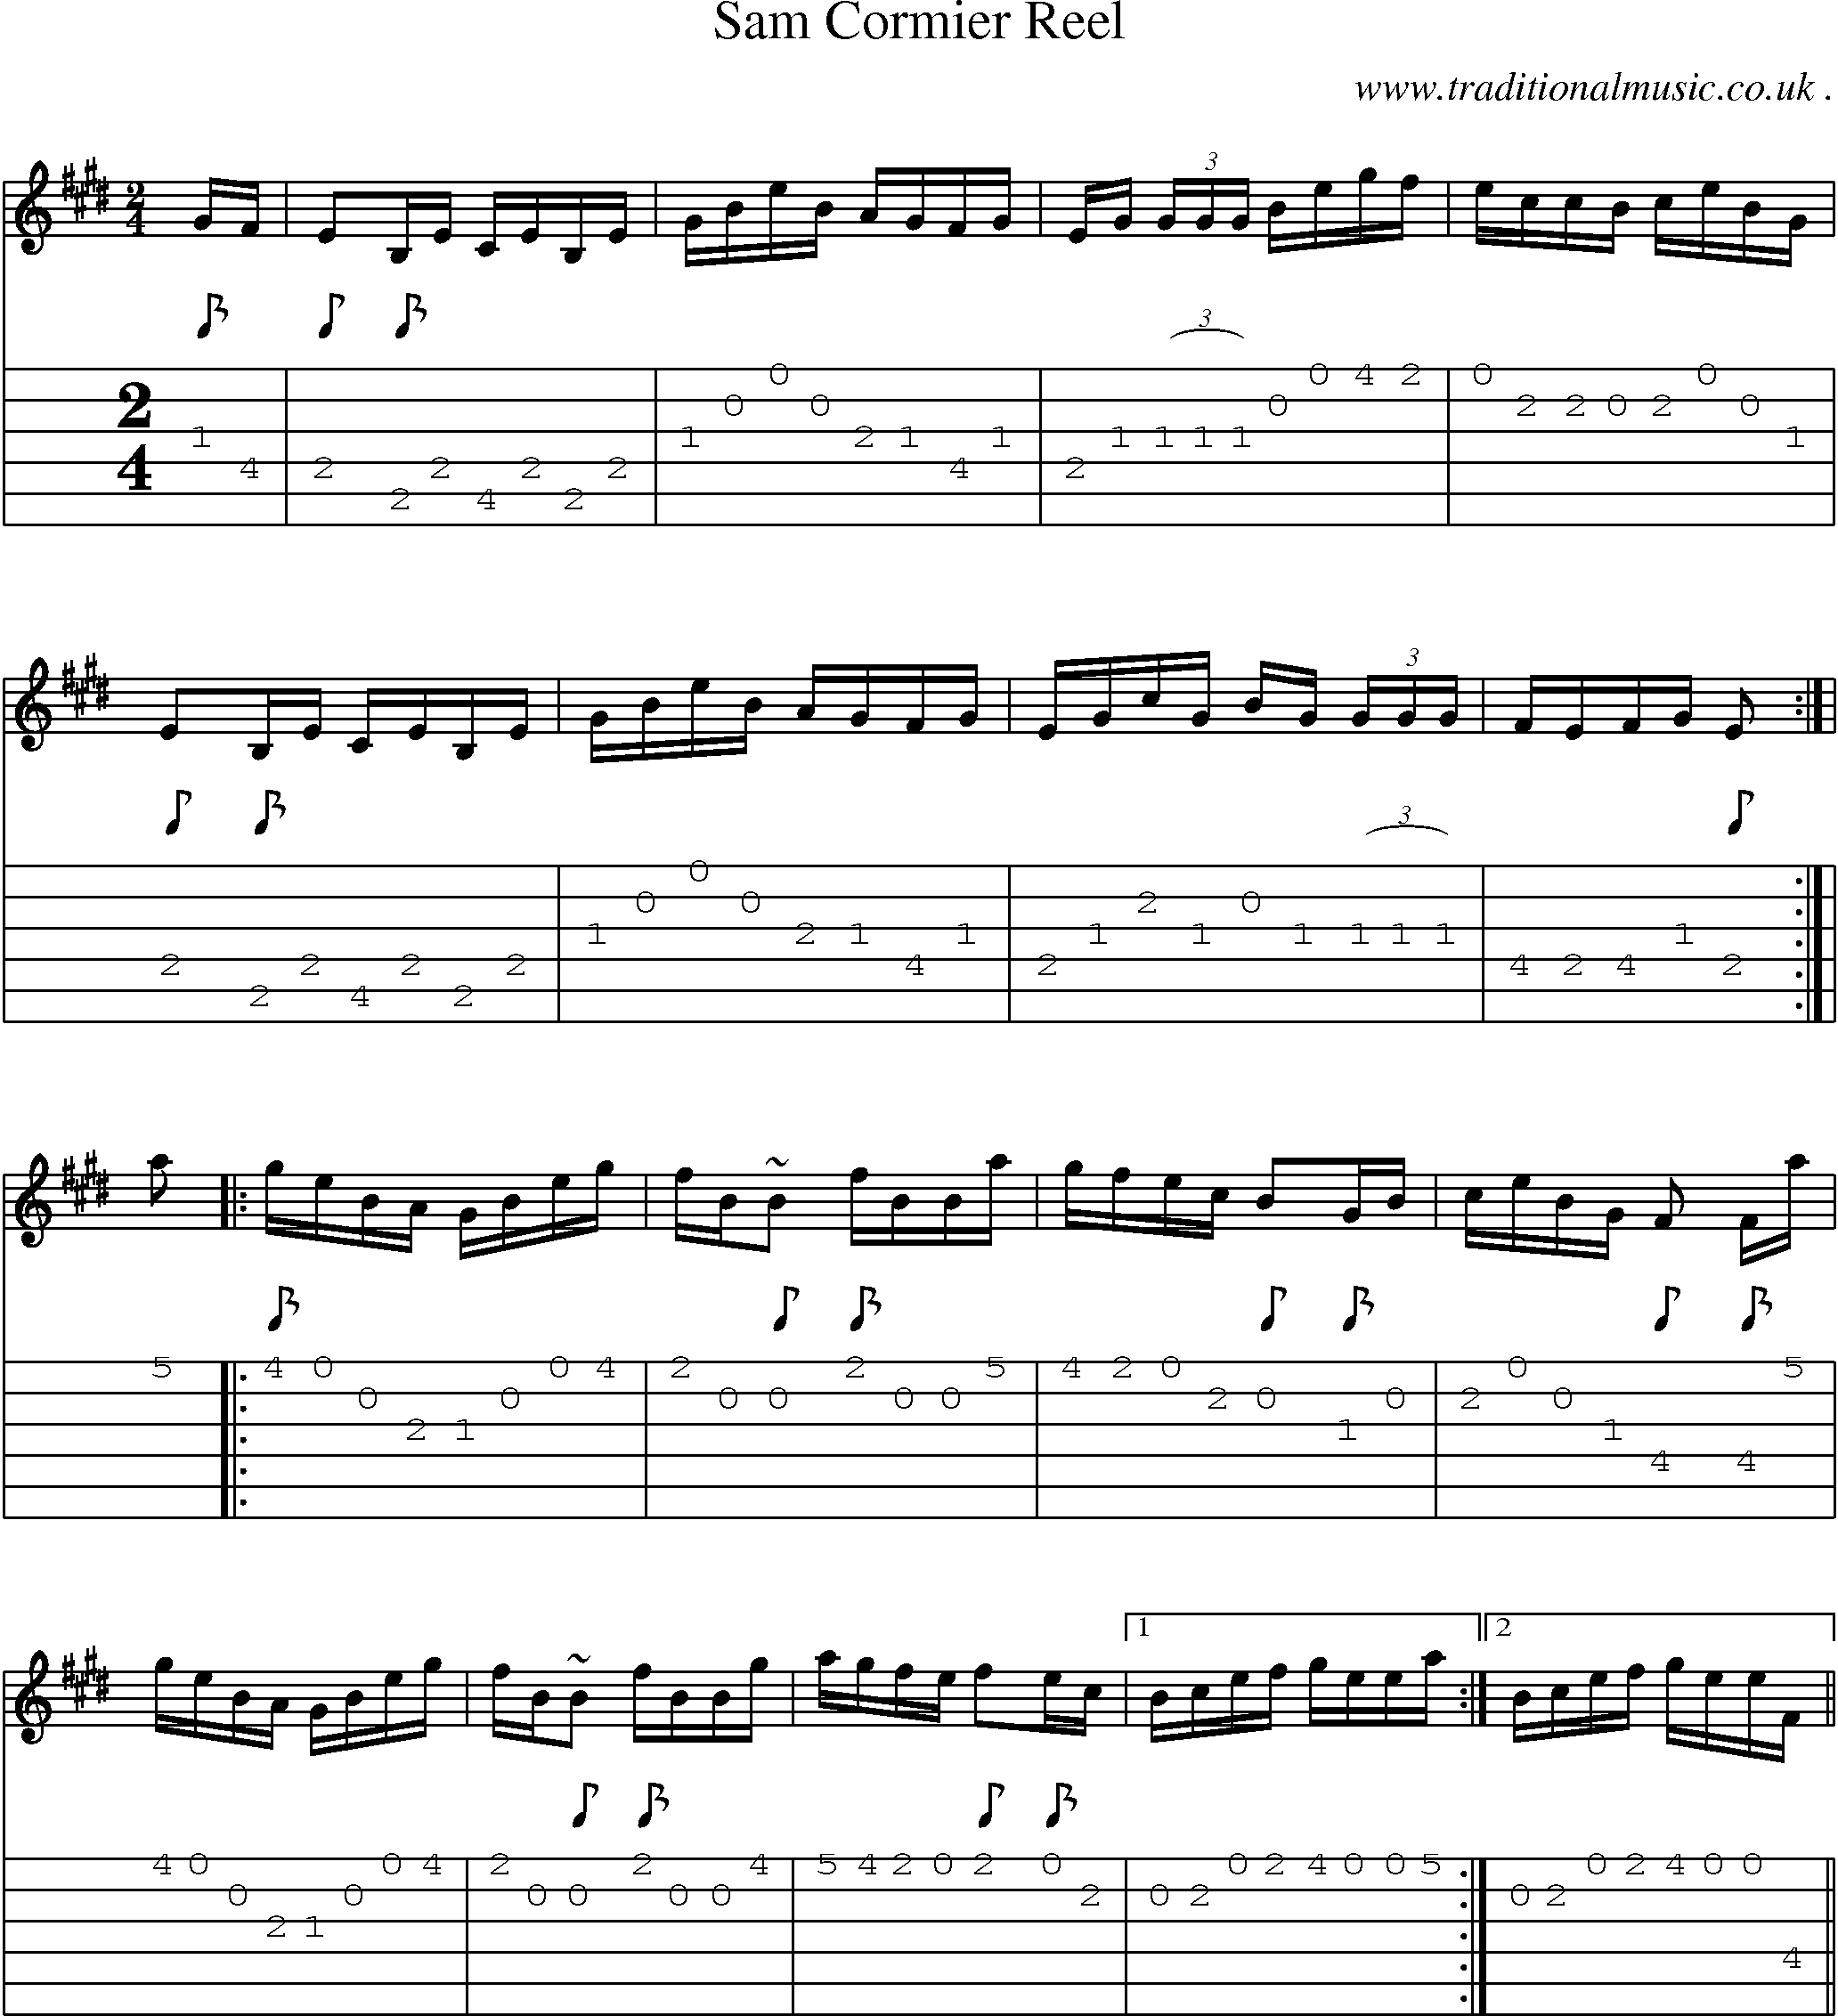 Music Score and Guitar Tabs for Sam Cormier Reel